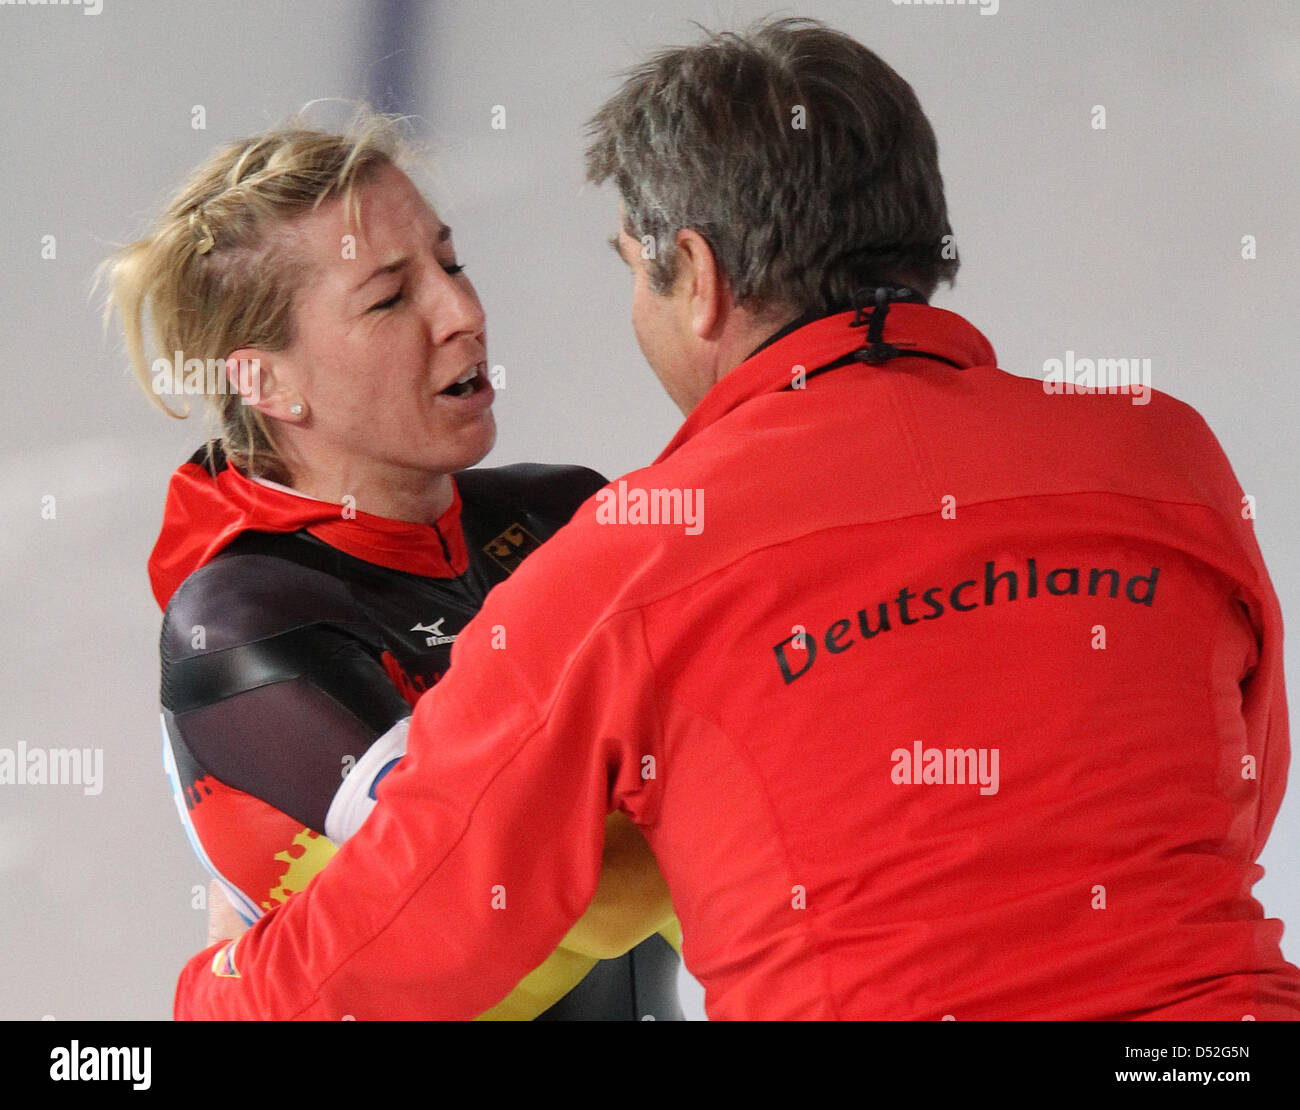 Anni Friesinger-Postma (L) of Germany and German team coach Markus Eicher after the Speed Skating women's team pursuit semifinals at the Richmond Olympic Oval during the Vancouver 2010 Olympic Games, Vancouver, Canada, 27 February 2010. Photo: Daniel Karmann  +++(c) dpa - Bildfunk+++ Stock Photo